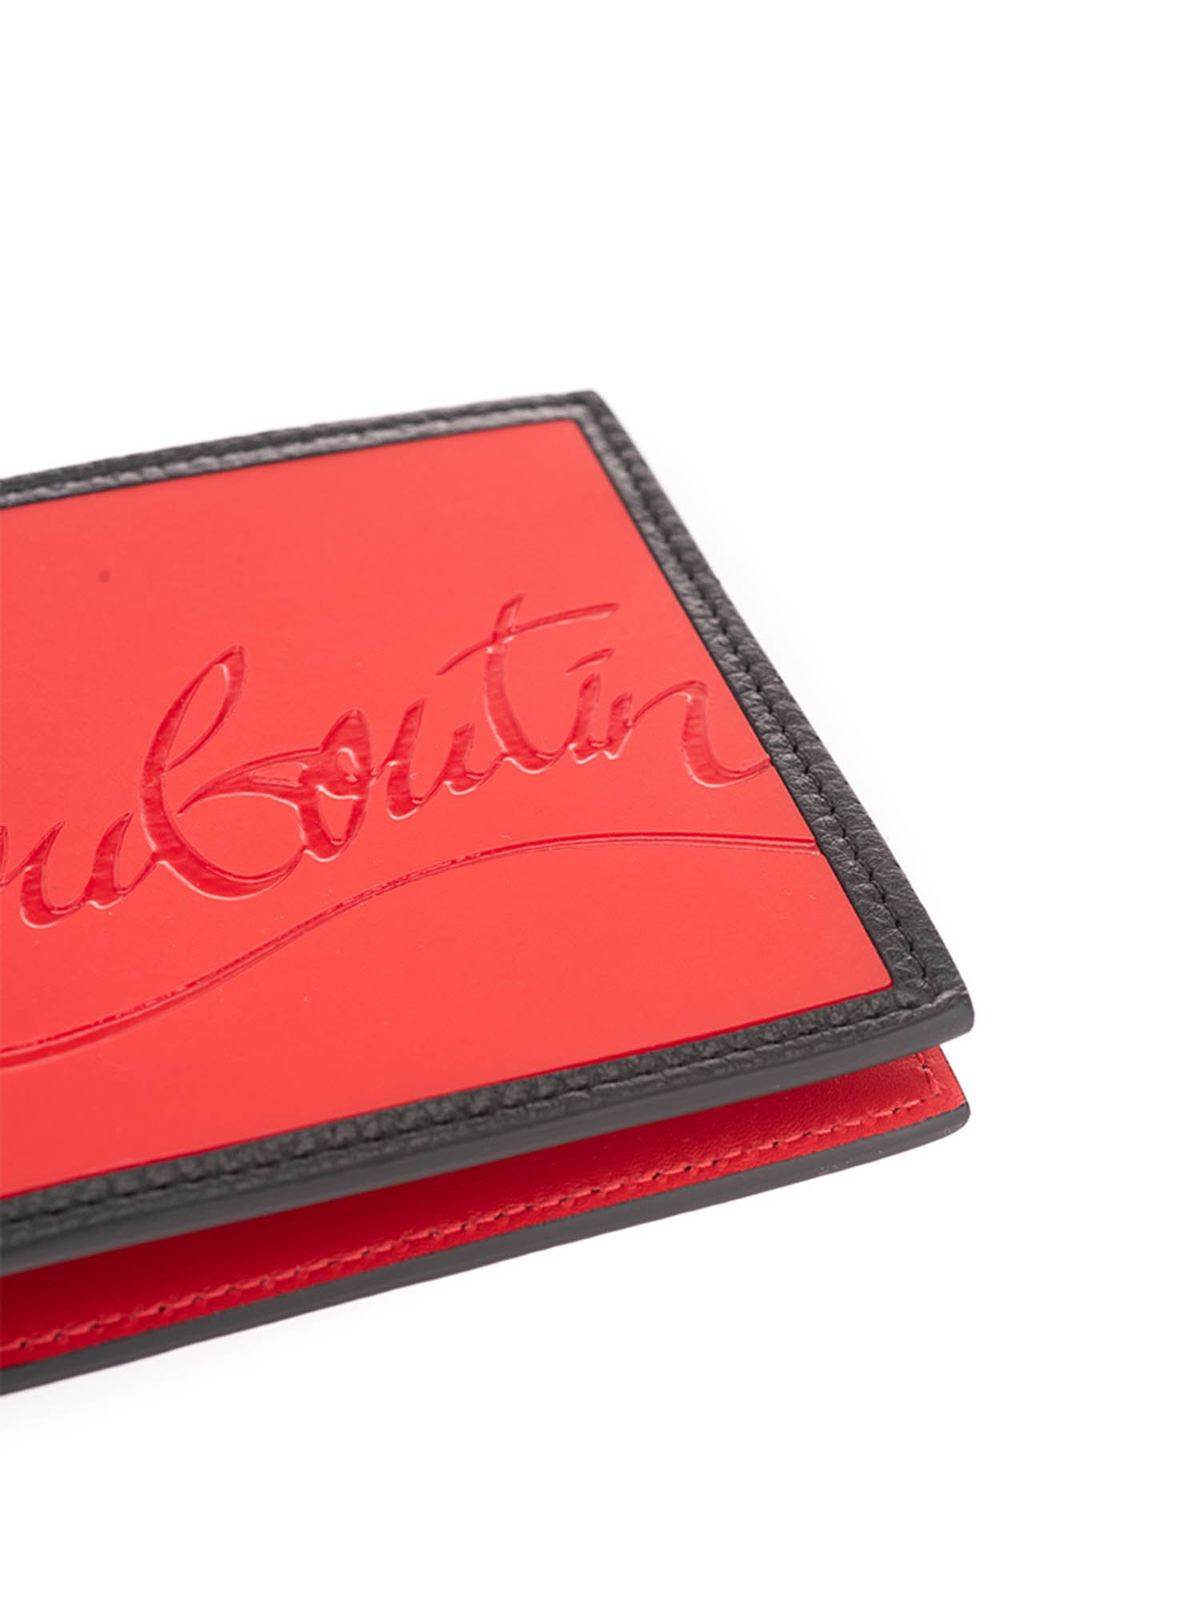 Coolcard Sneakers Wallet in Red - Christian Louboutin